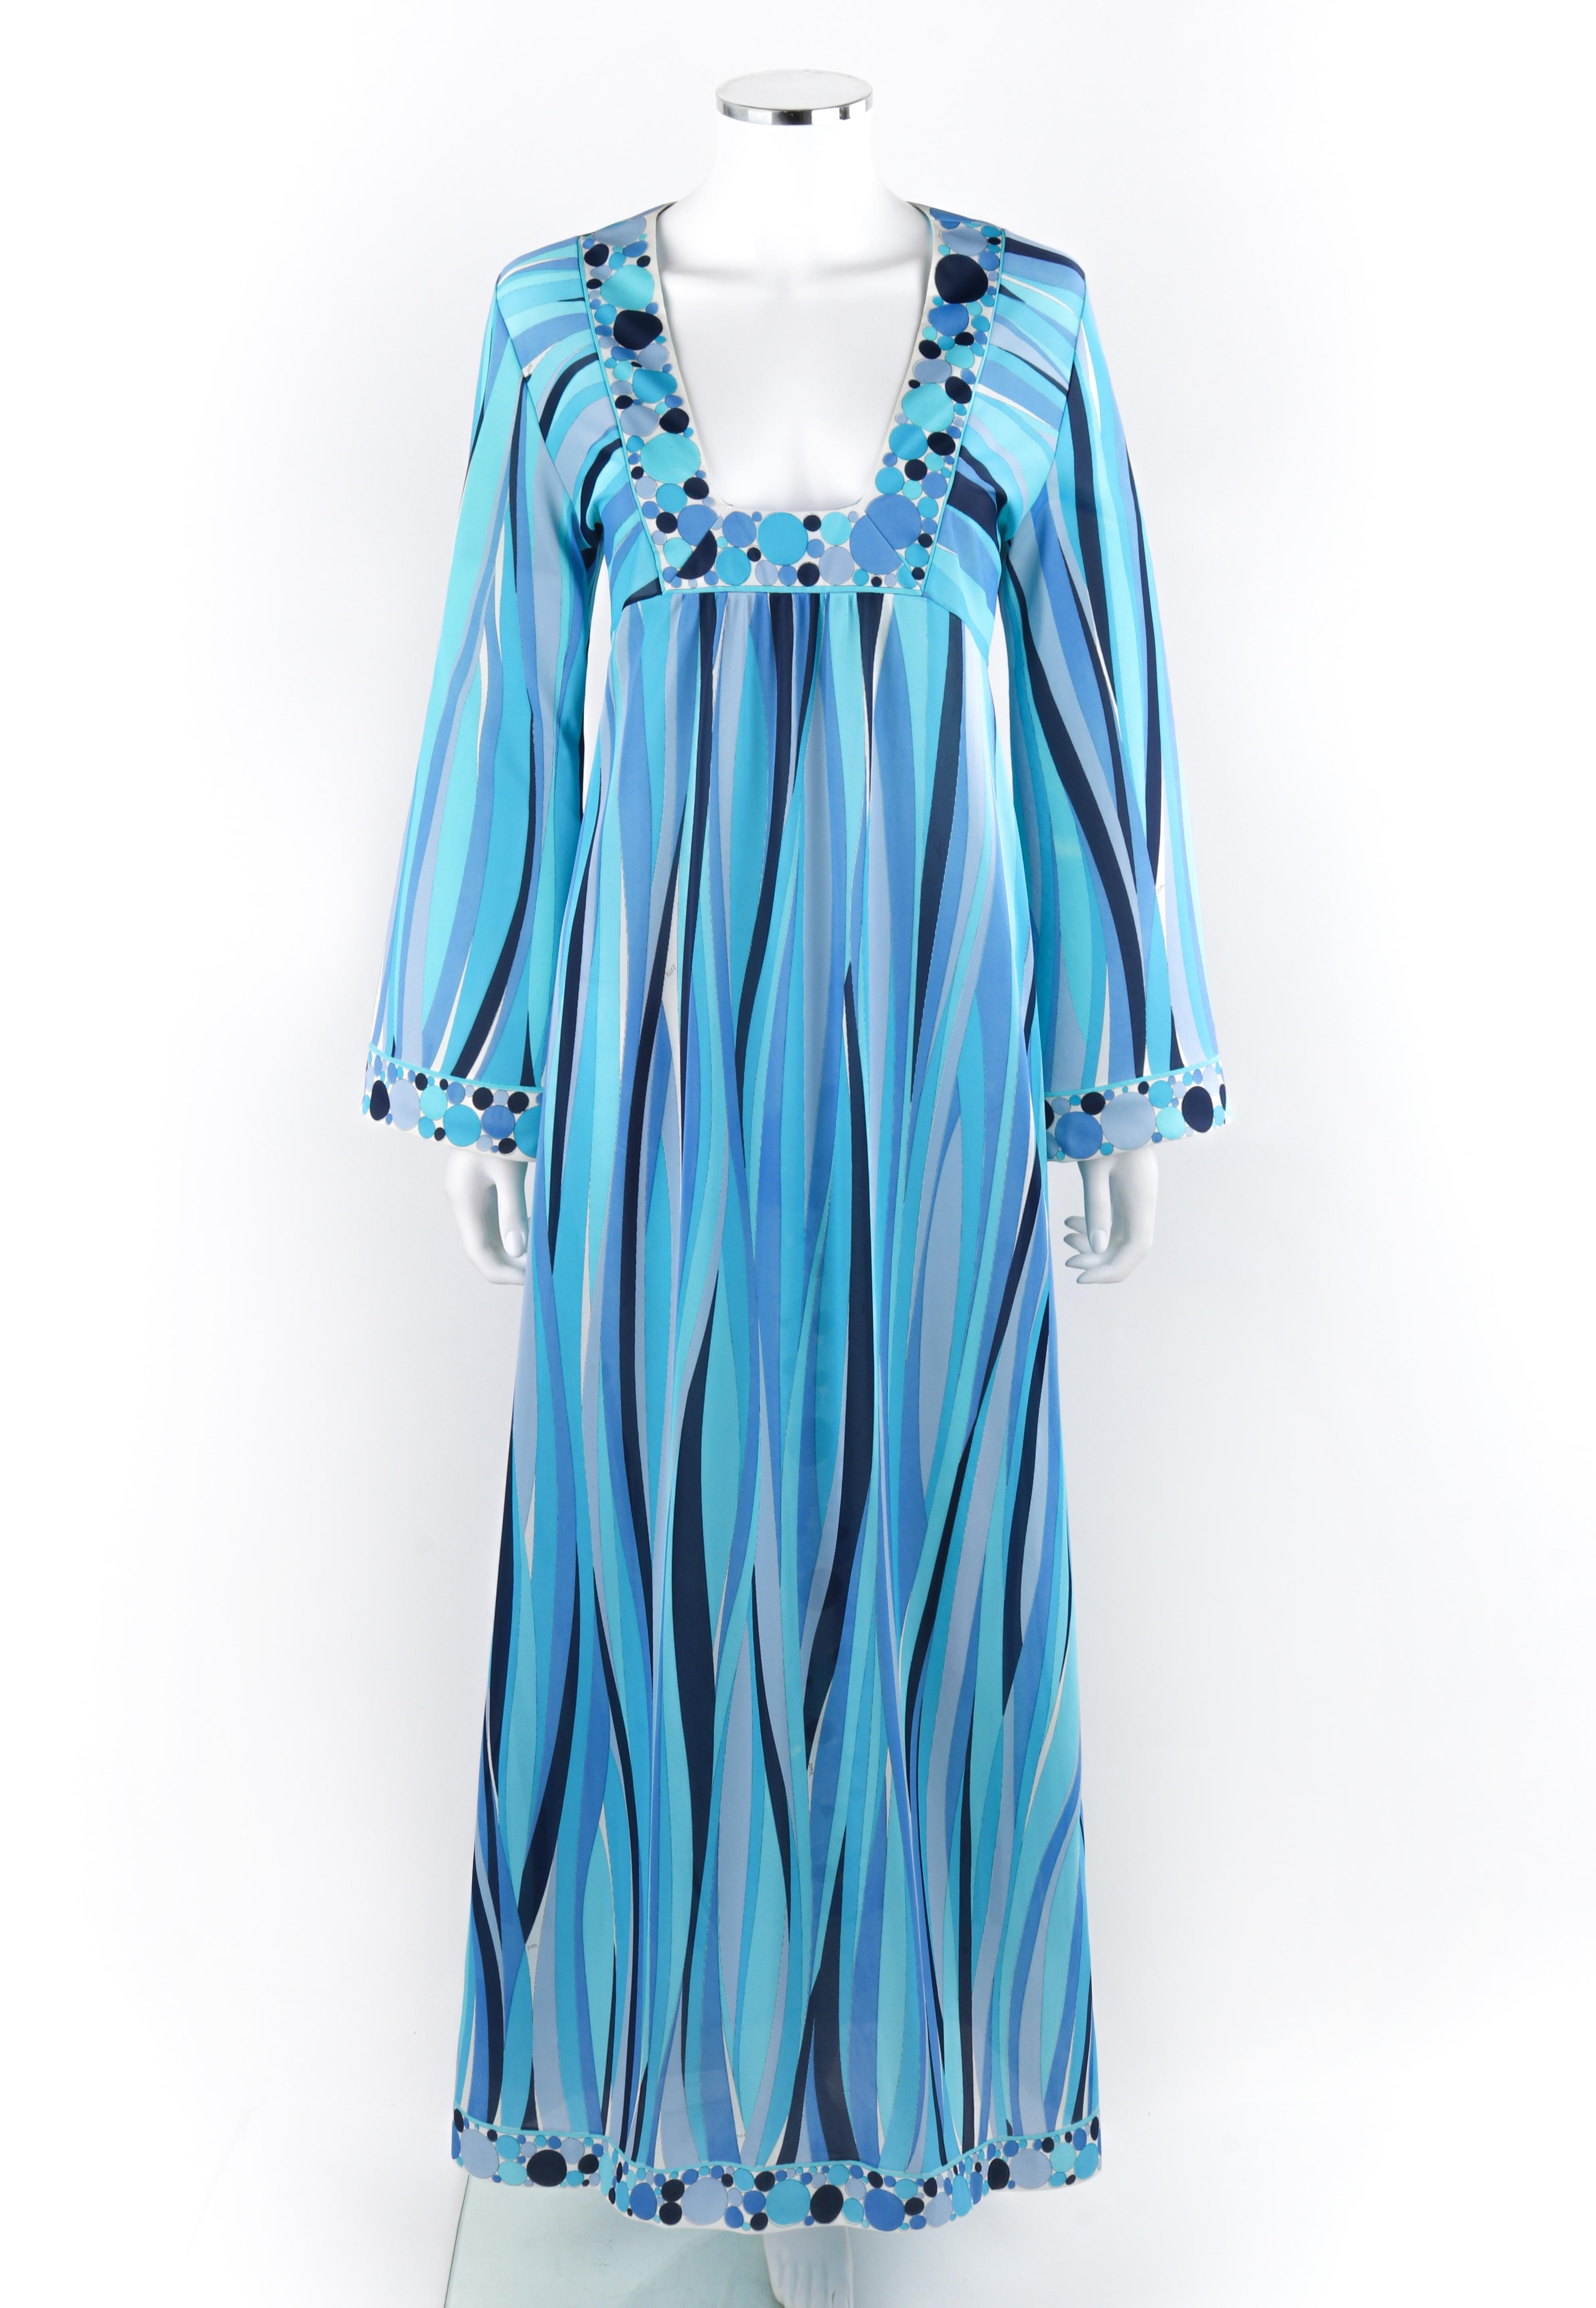 EMILIO PUCCI c.1960's Blue Wave Print Polka Dot Beach Swim Cover Lounge Robe
 
Brand / Manufacturer: Emilio Pucci
Circa: 1960's
Collection: Emilio Pucci for Formfit Rogers
Style: Swimsuit Coverup / lounge robe
Color(s): Shades of white and